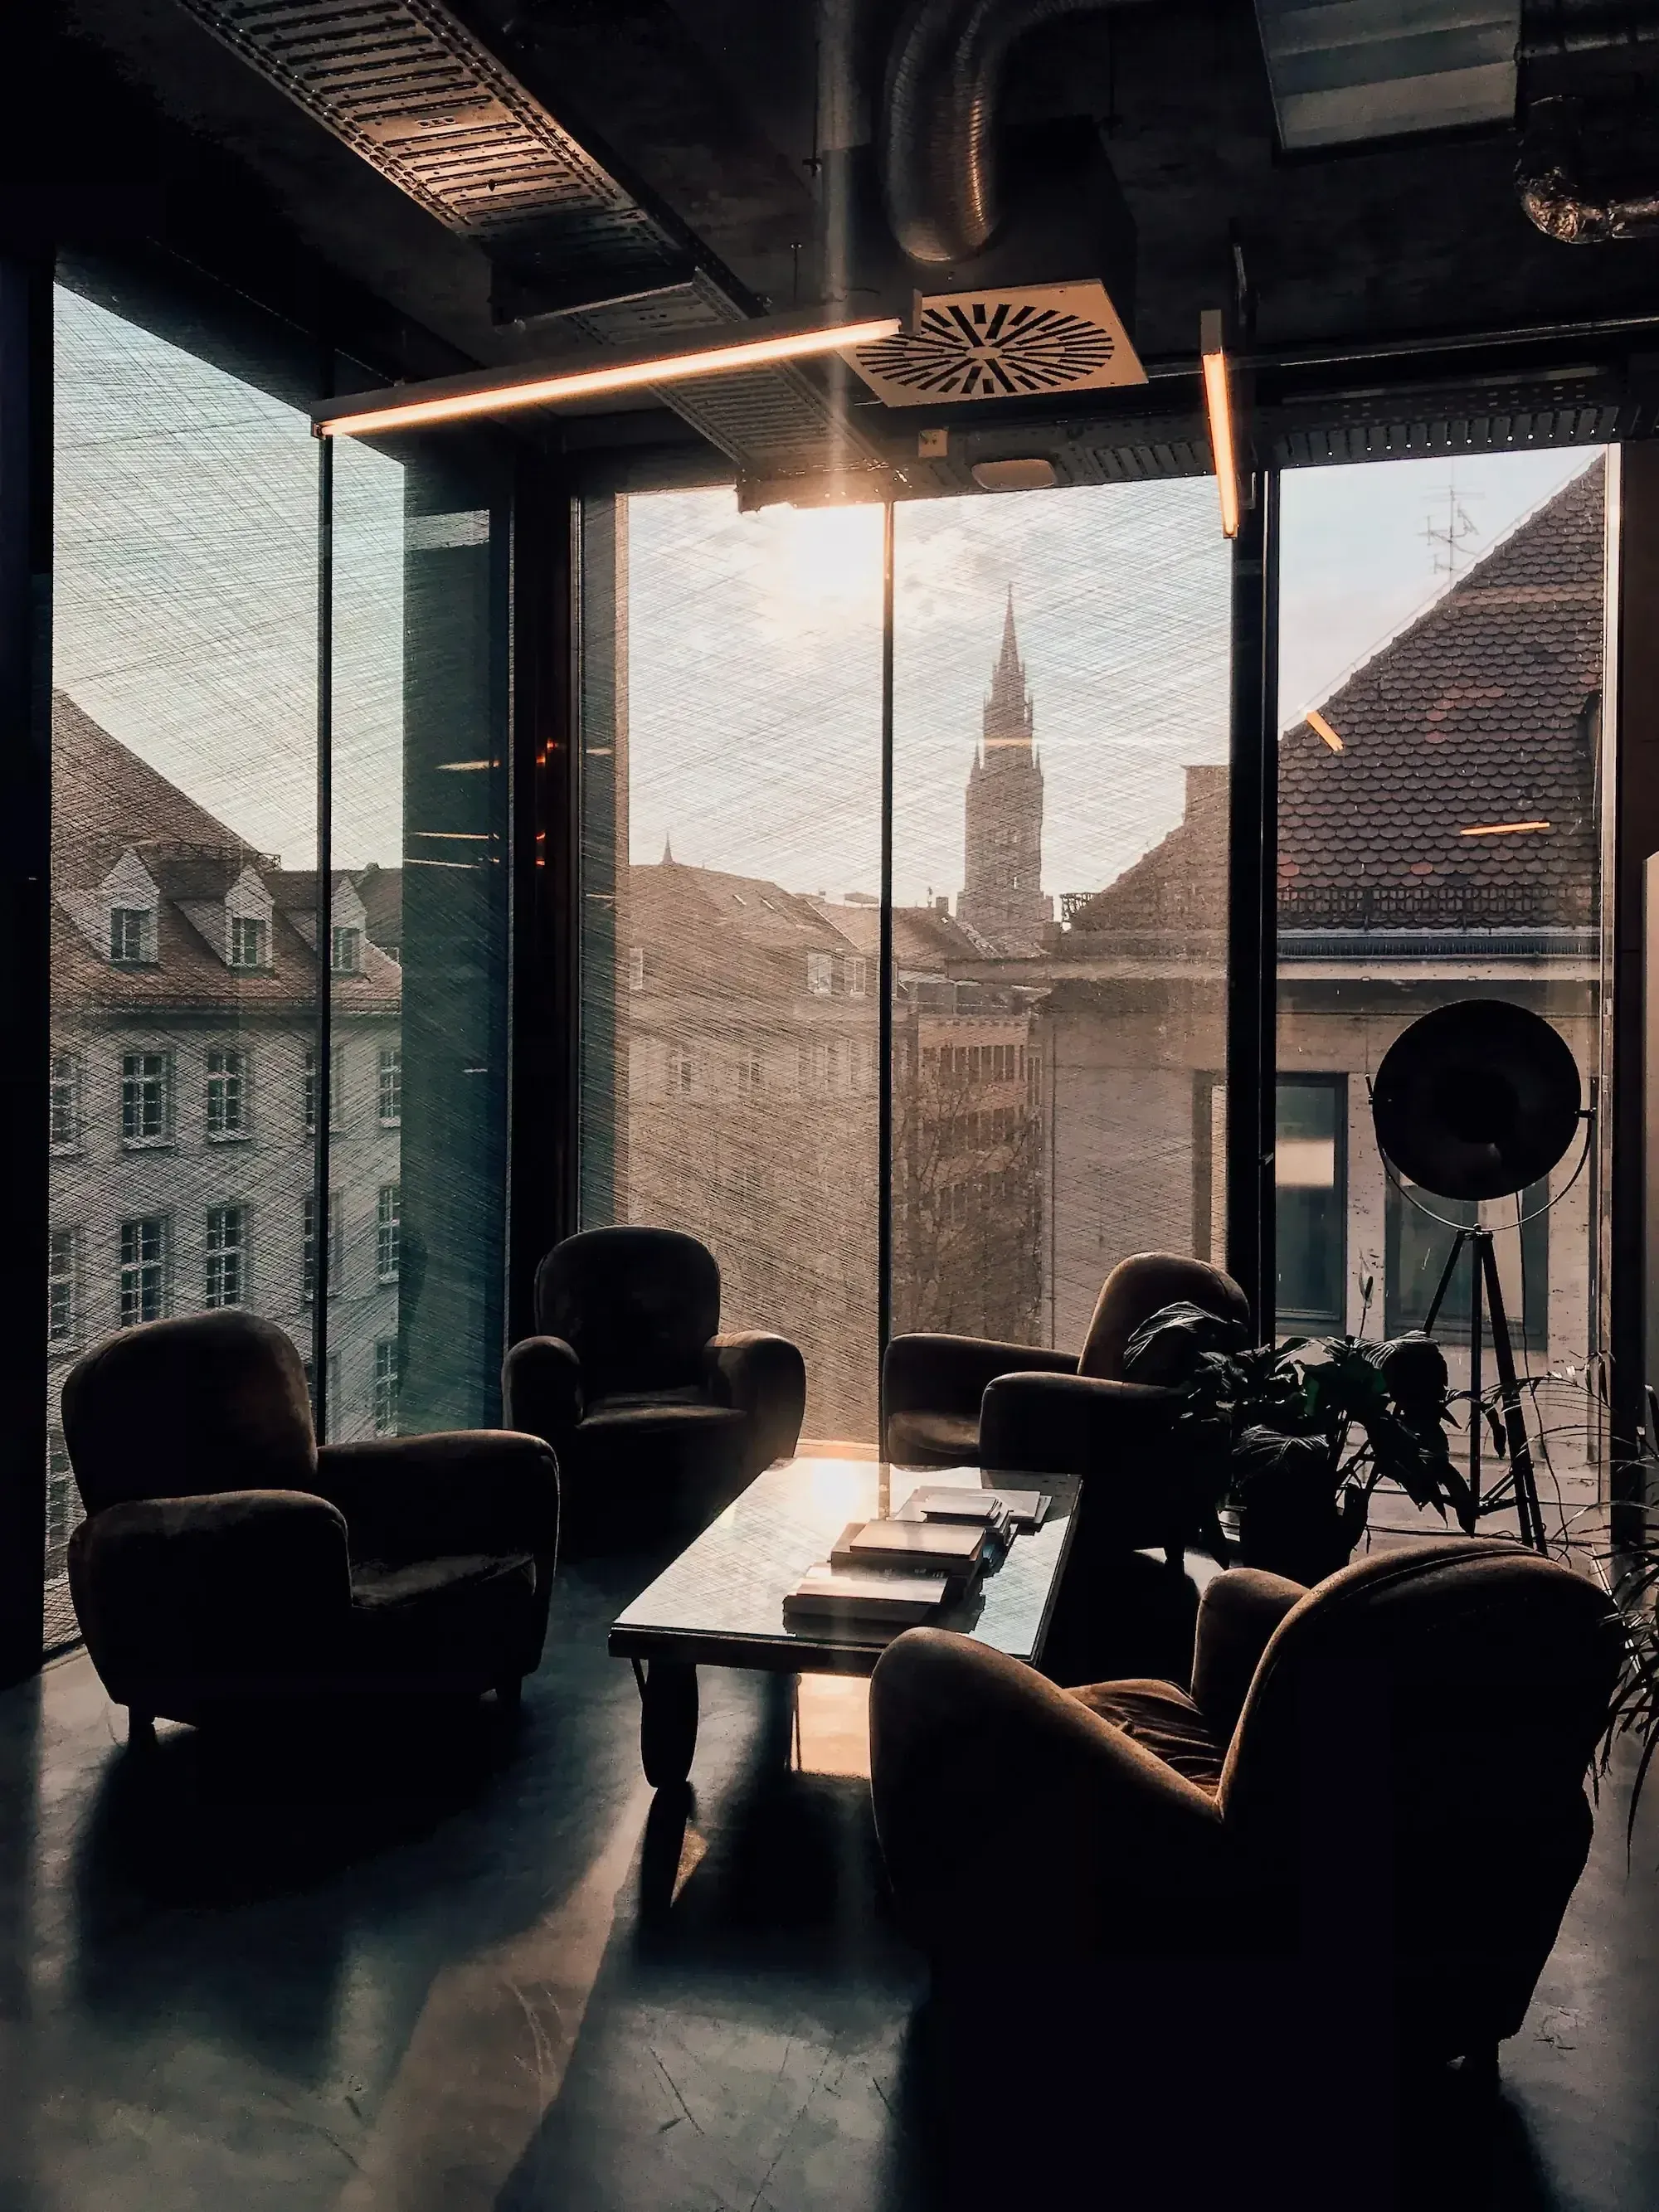 Open and light office space with comfortable chairs, in the background the Munich city skyline.